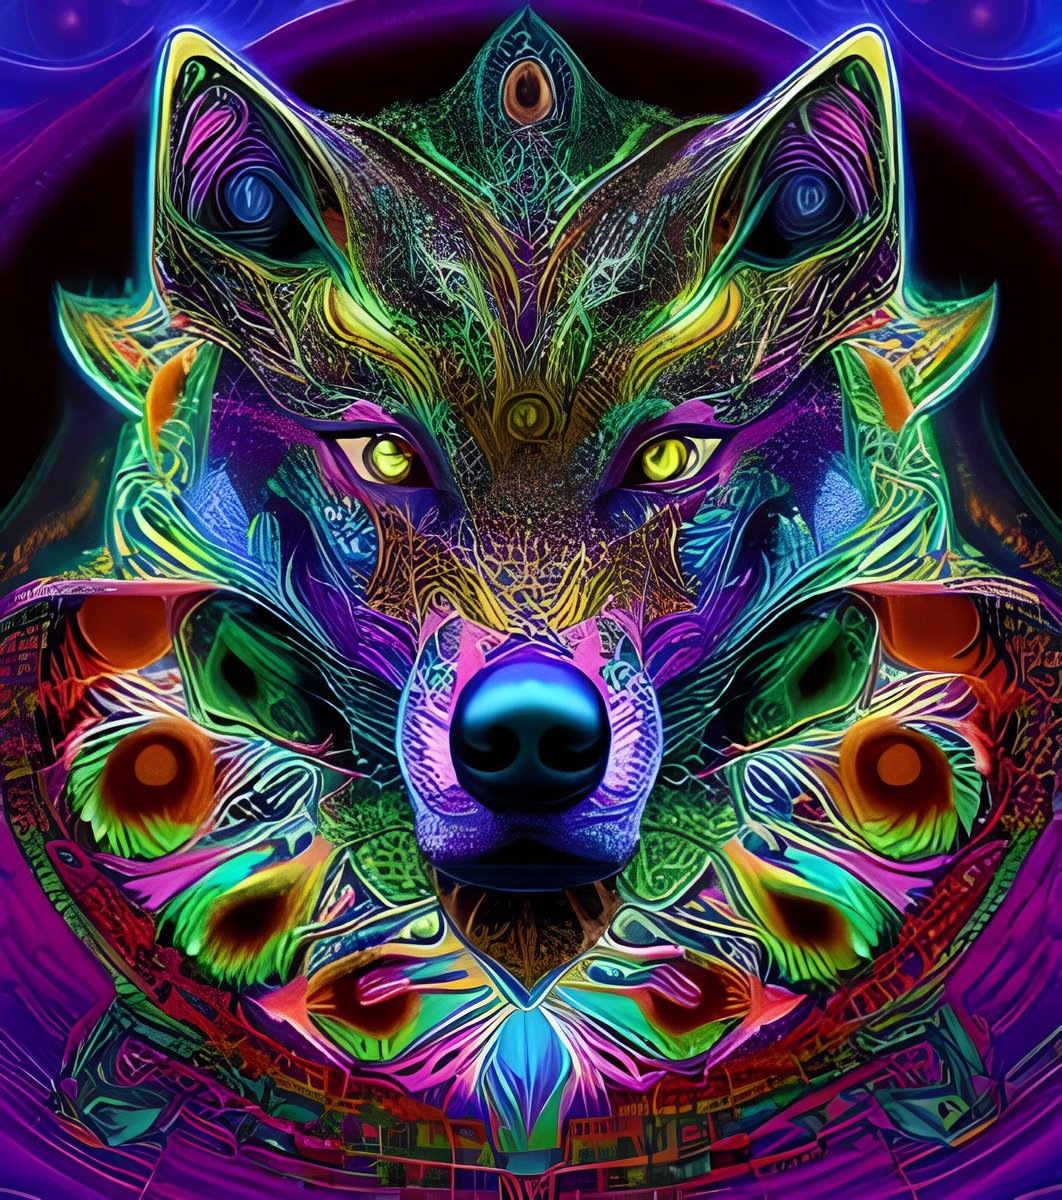 GD fam✌

💥Collector's edition of Wolves💥

#BTC #Ethereum #OpenSea #NFTCommunity #MATIC #Polygon #nftcollector #NFTCommmunity #tezos

opensea.io/assets/matic/0…